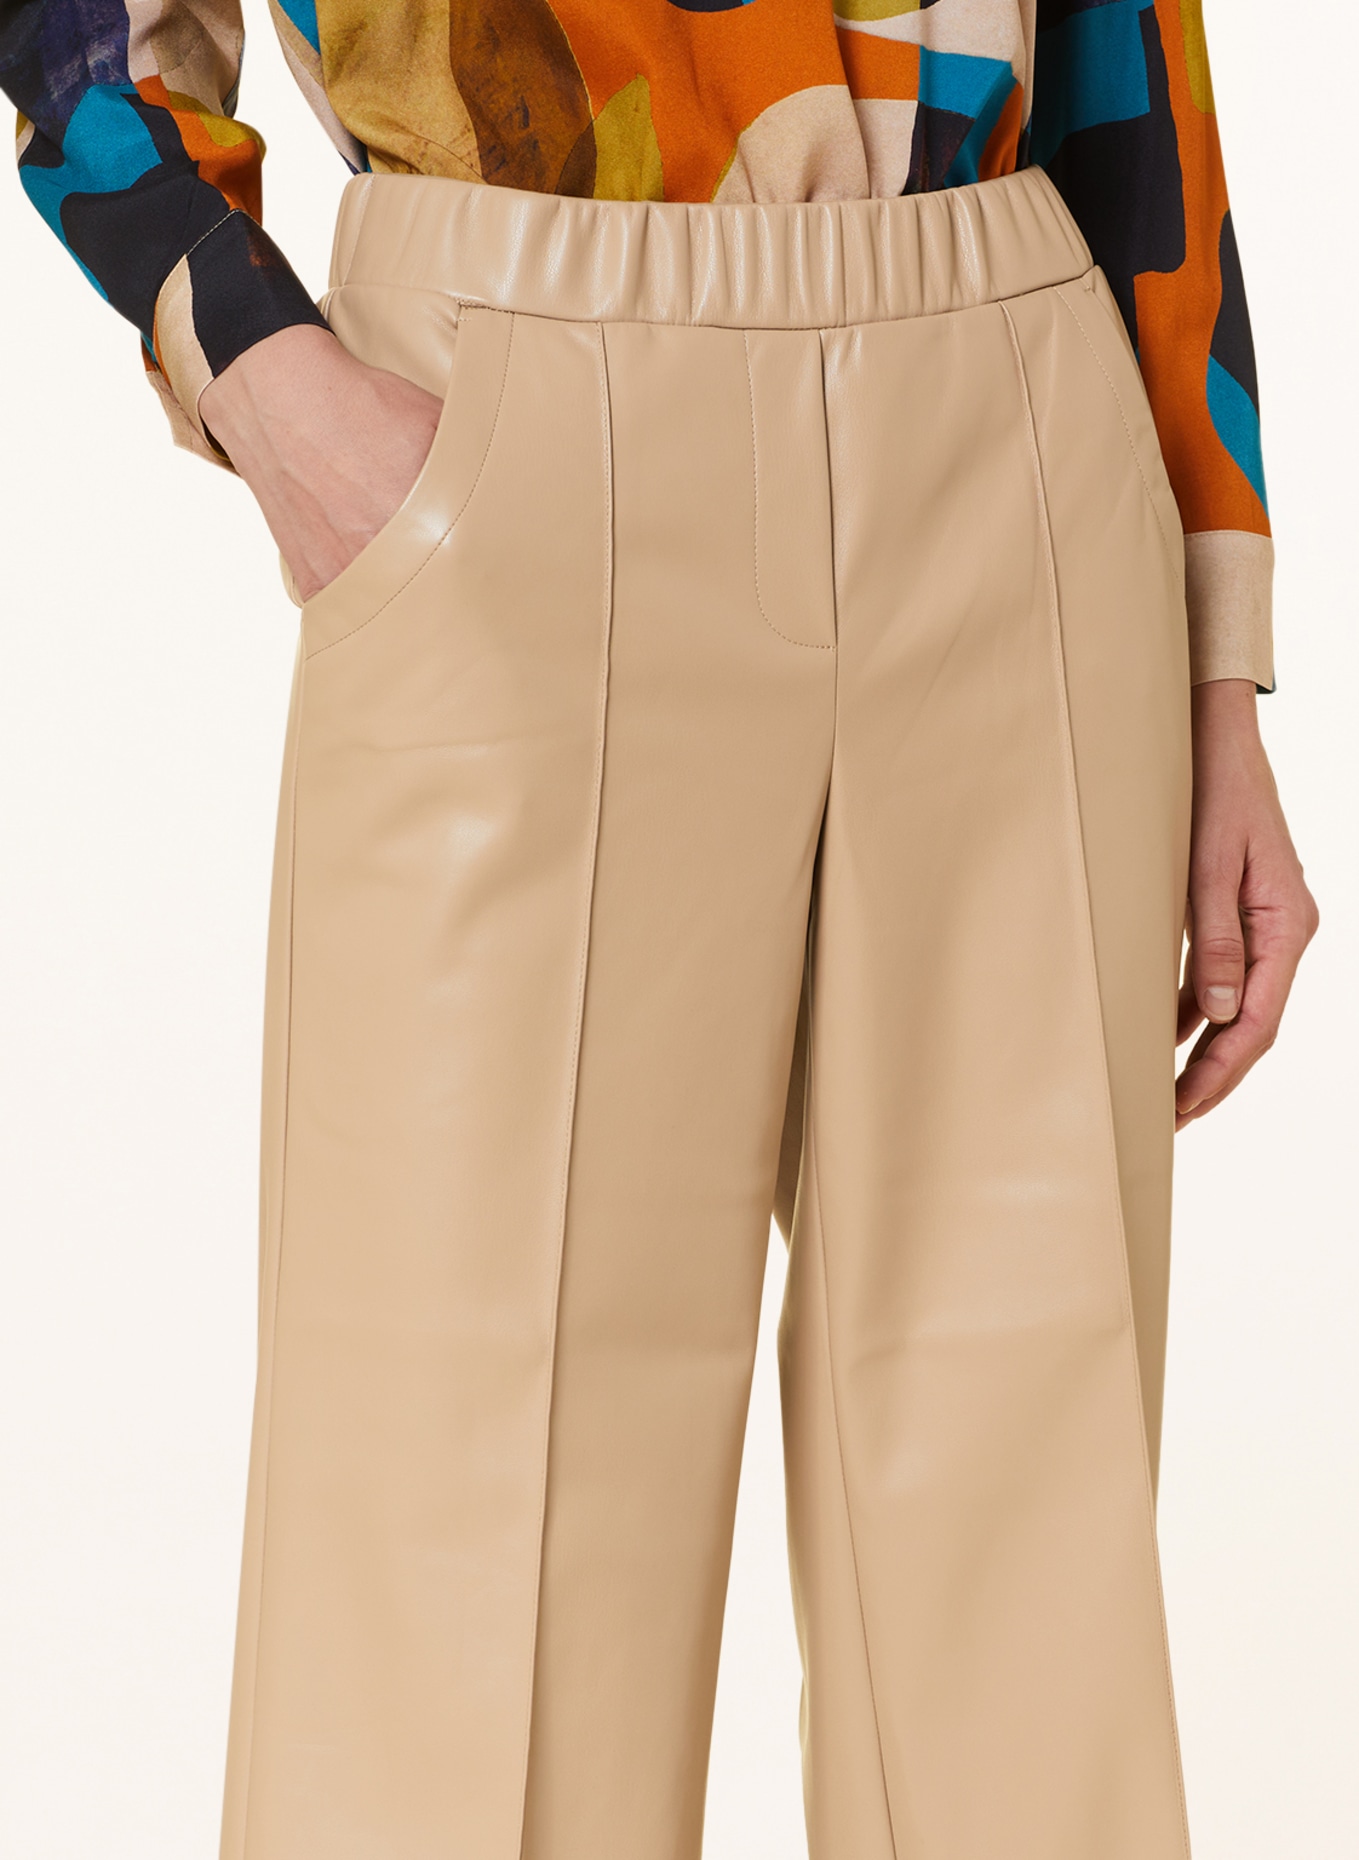 CATNOIR Pants in leather look, Color: BEIGE (Image 5)